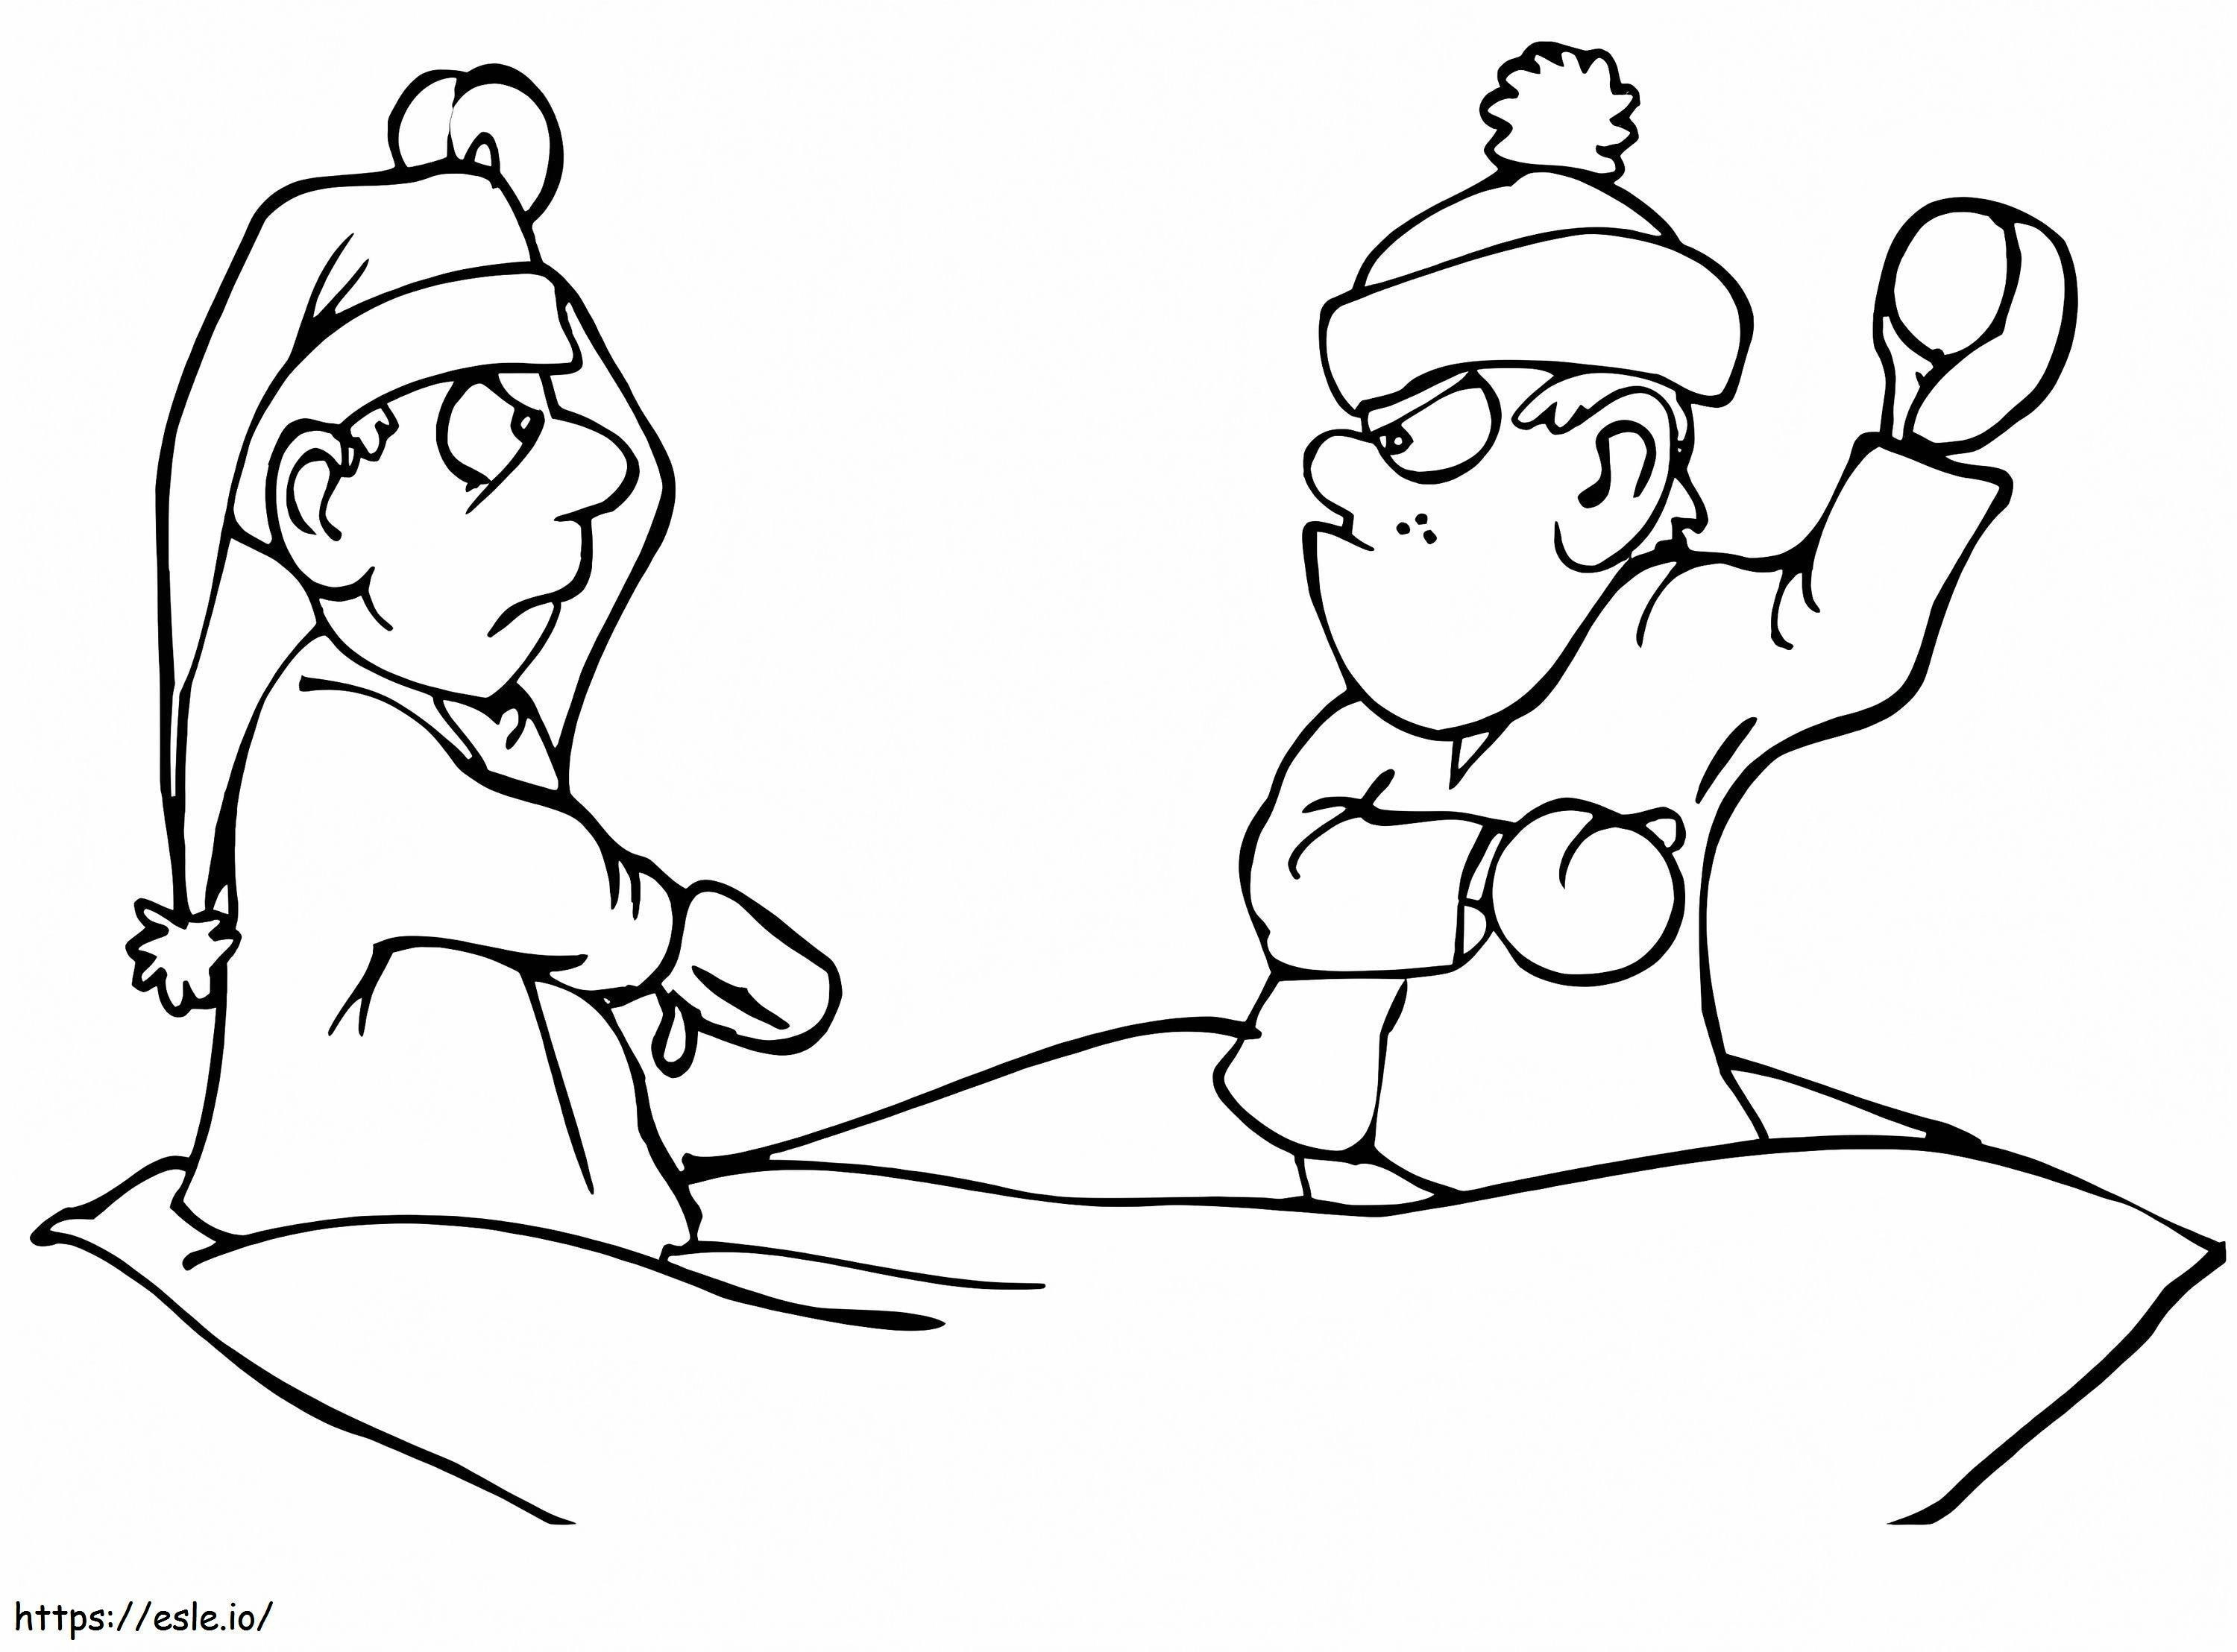 Free Printable Snowball Fight coloring page